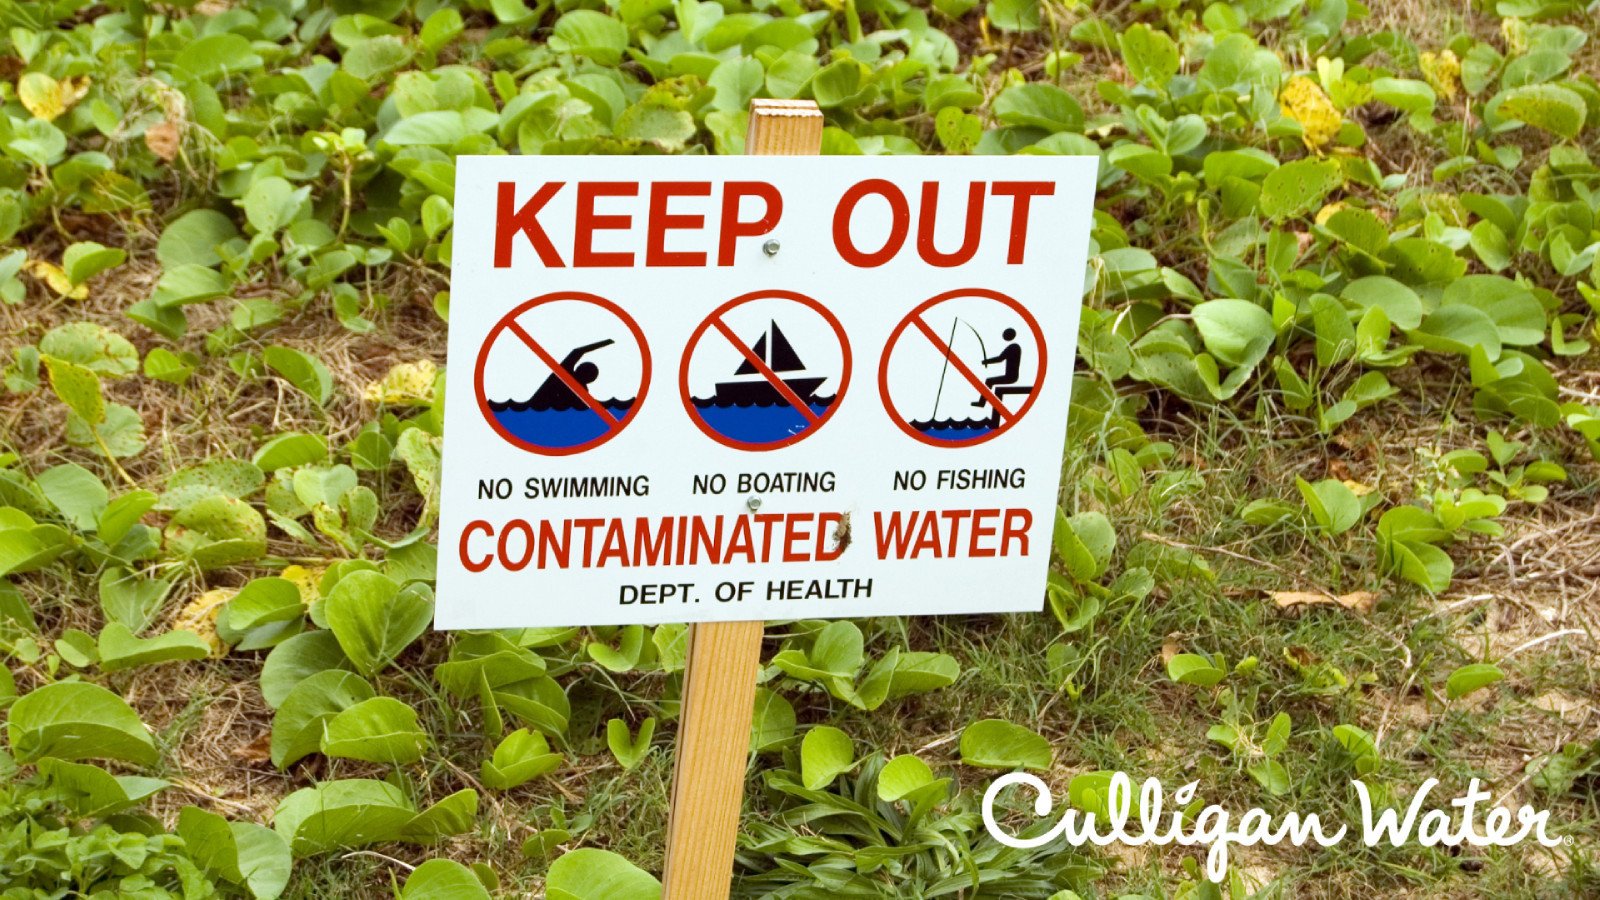 A sign in a grassy field warning of contaminated water